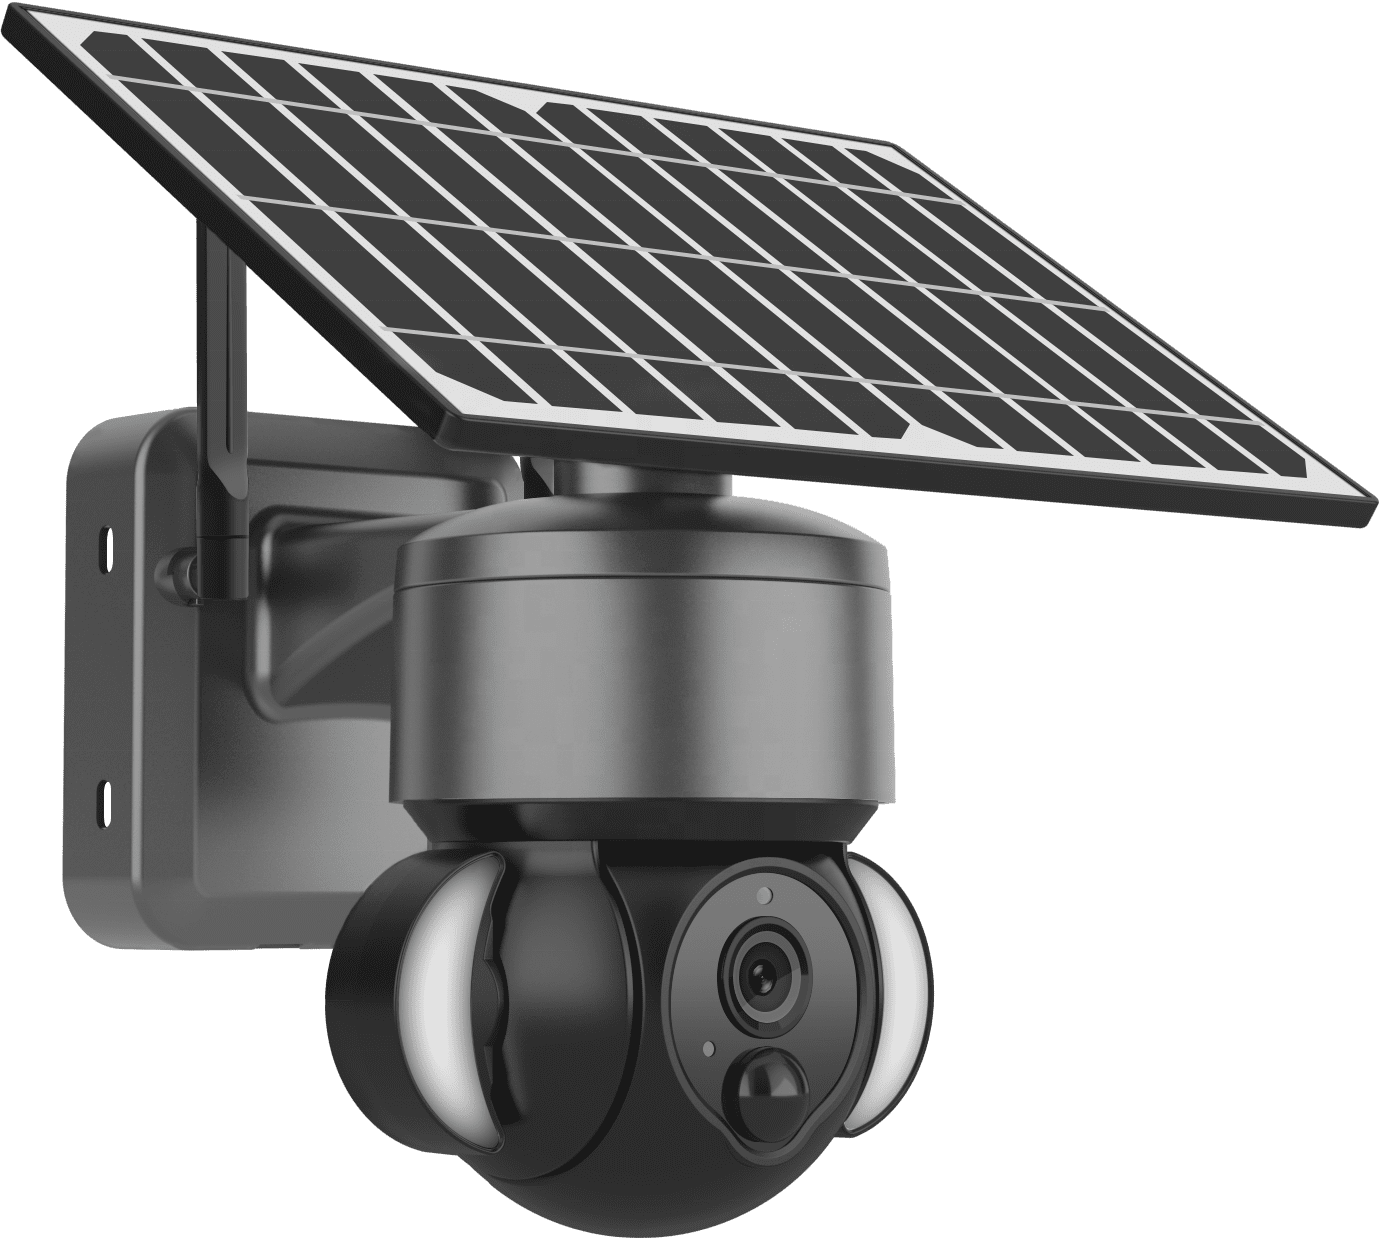 New Style Solar Panel Power HD 3MP 4G IP Camera Solar Security Camera with Smart Floodlight | Electrr Inc